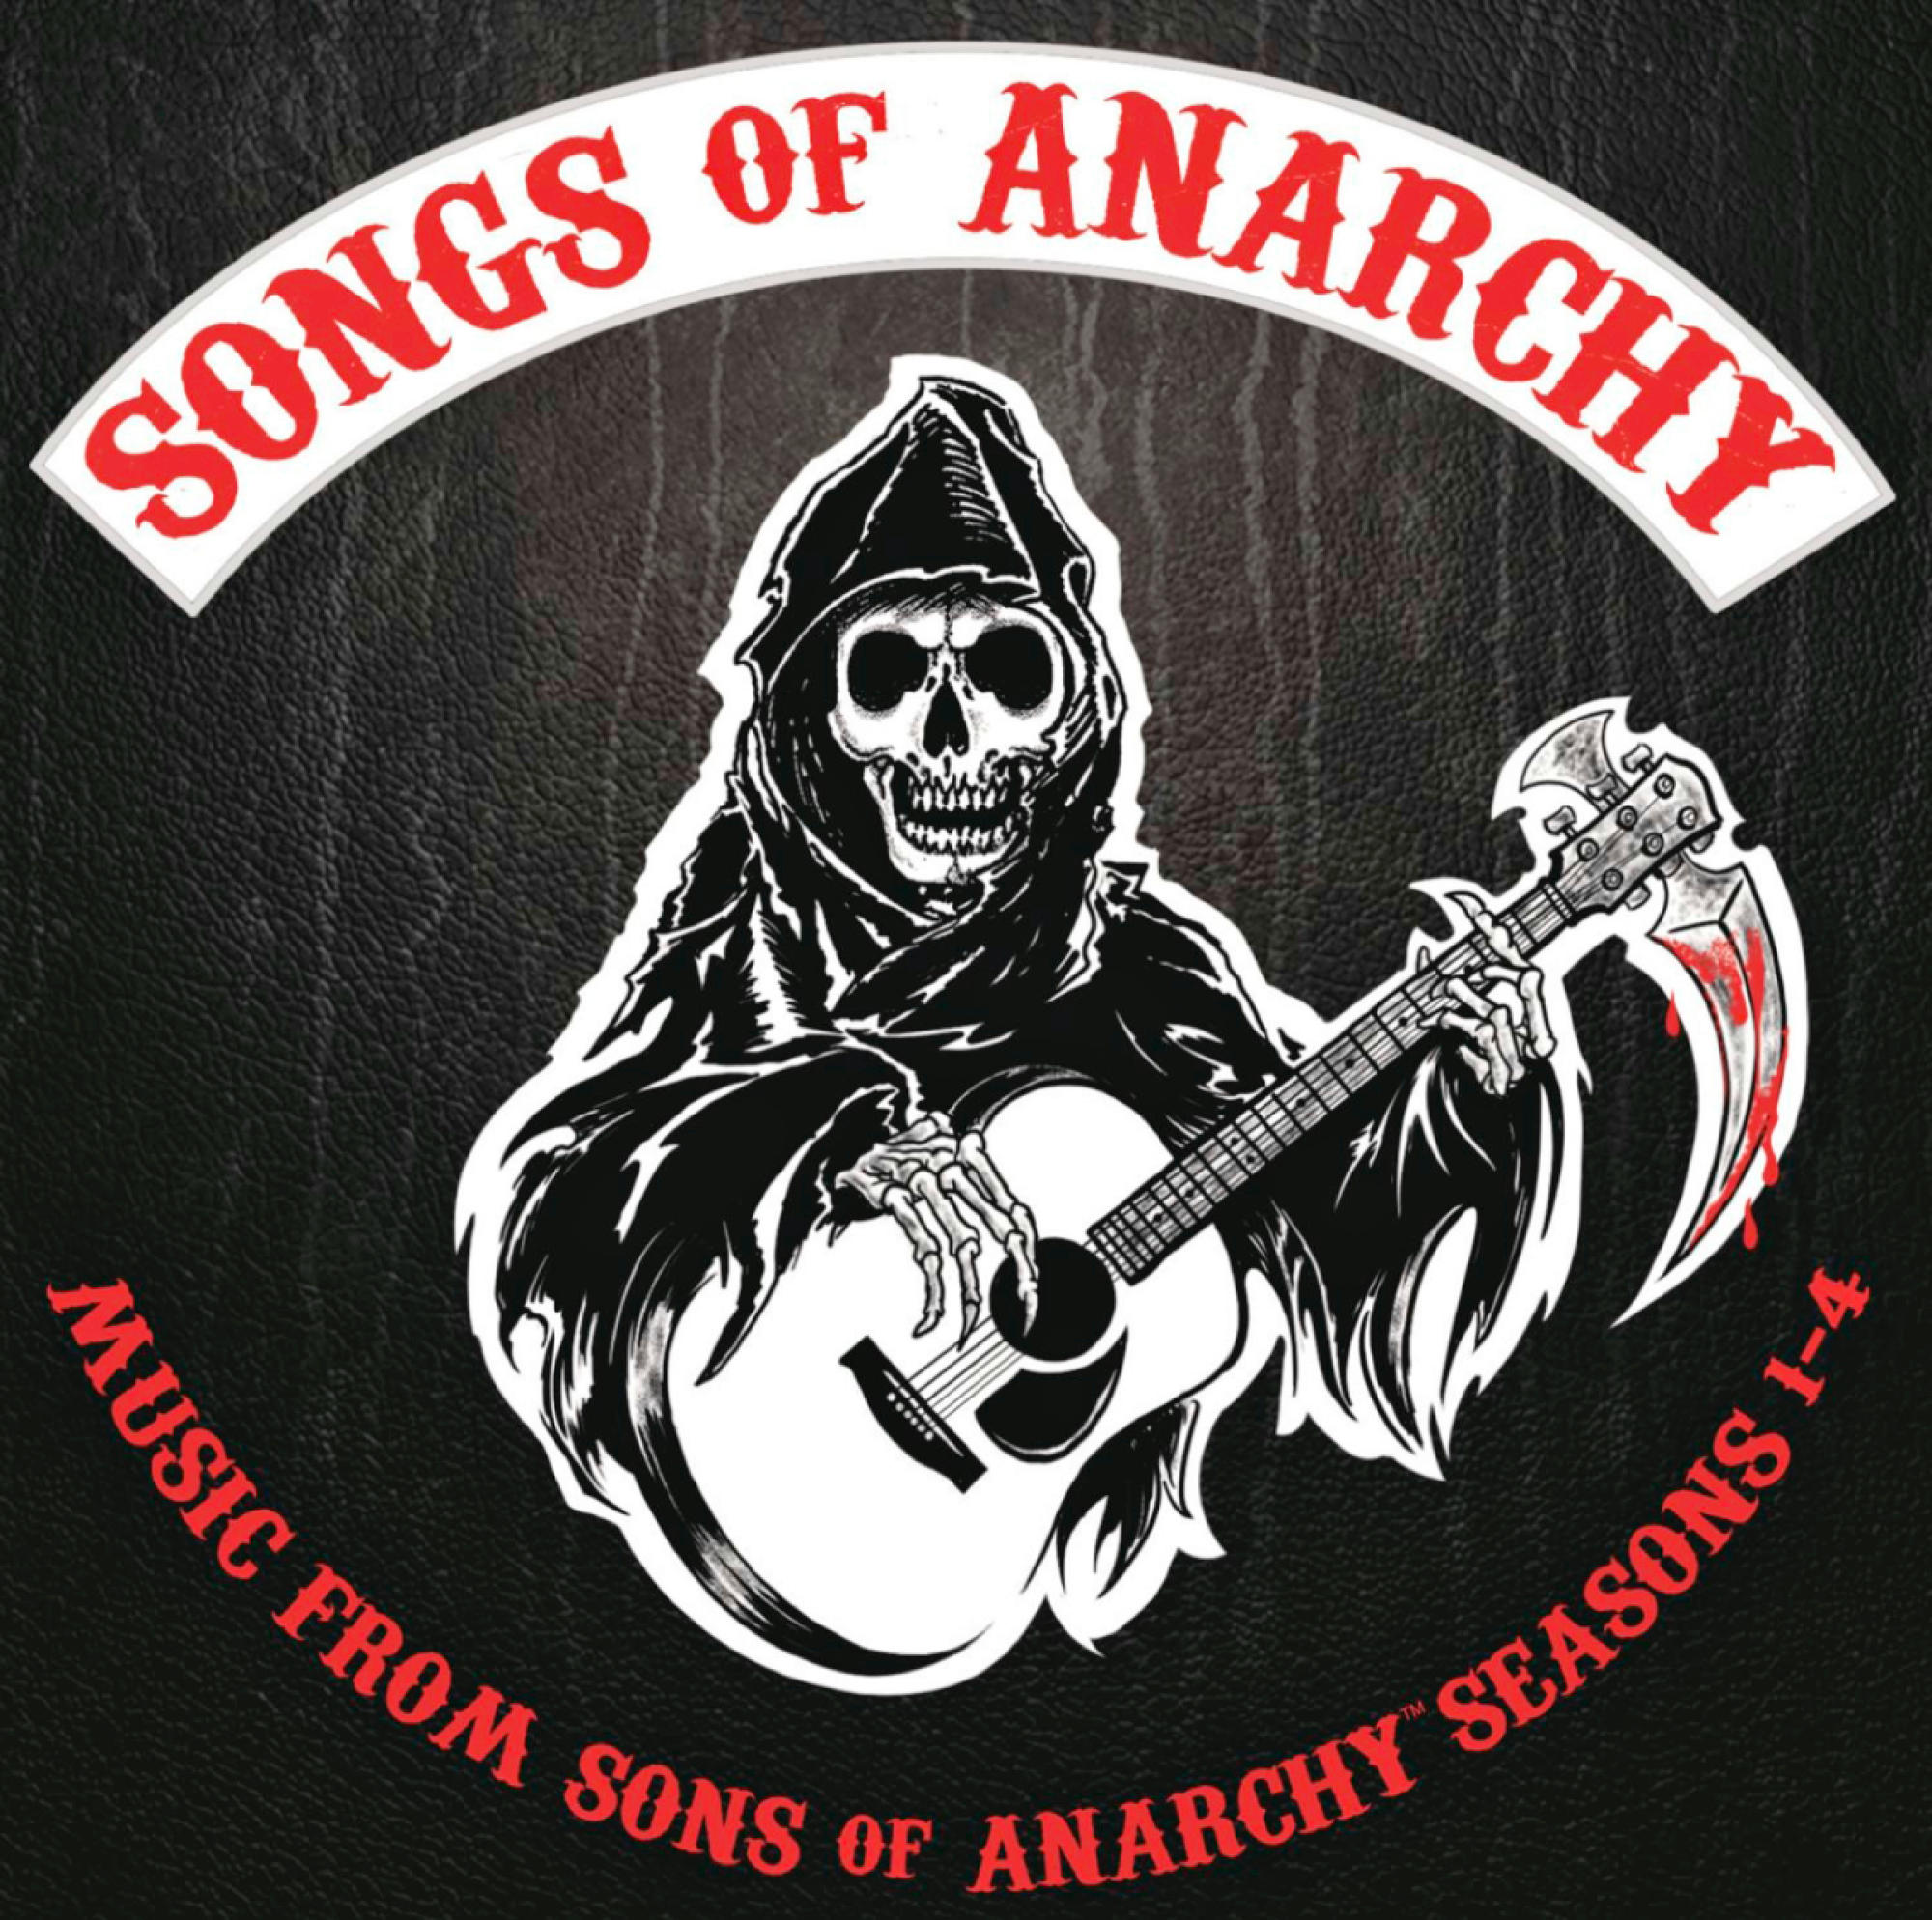 VARIOUS - Songs Of Anarchy: (CD) Season Music Sons Of Anarchy 1-4 - From